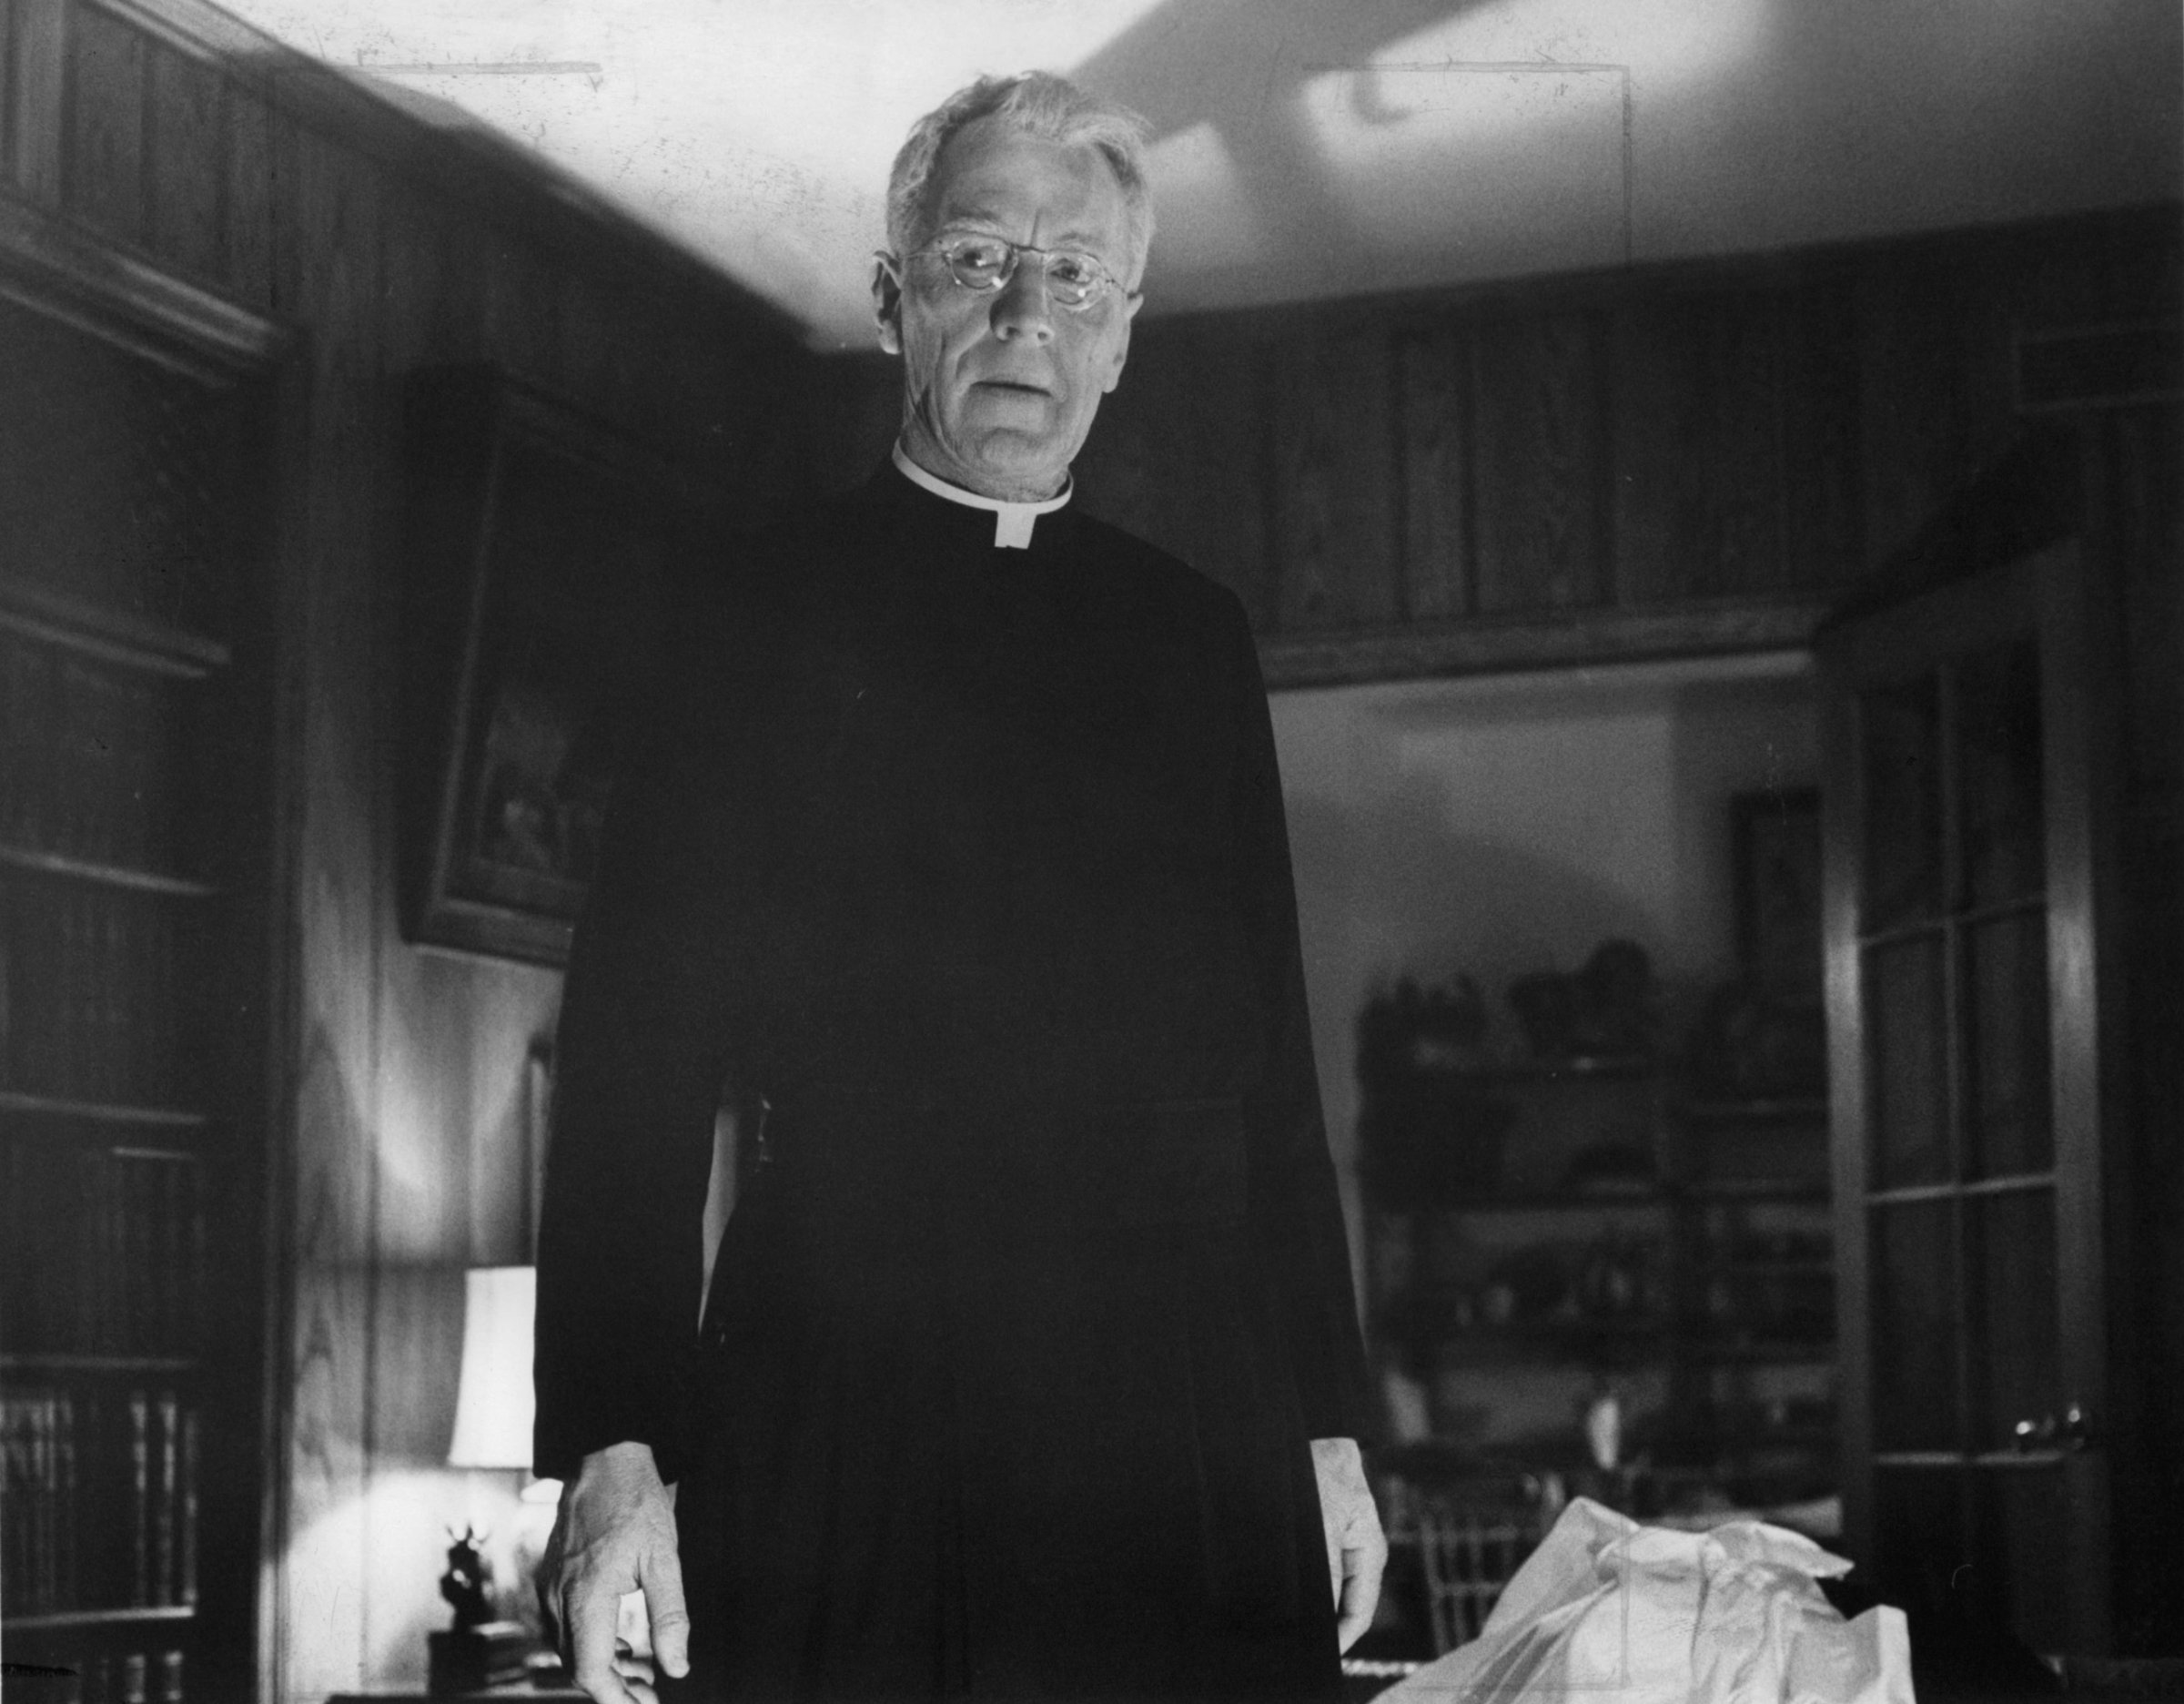 Max Von Sydow stands in priest uniform in a scene from the film 'The Exorcist', 1973. (Photo by Warner Brothers/Getty Images)